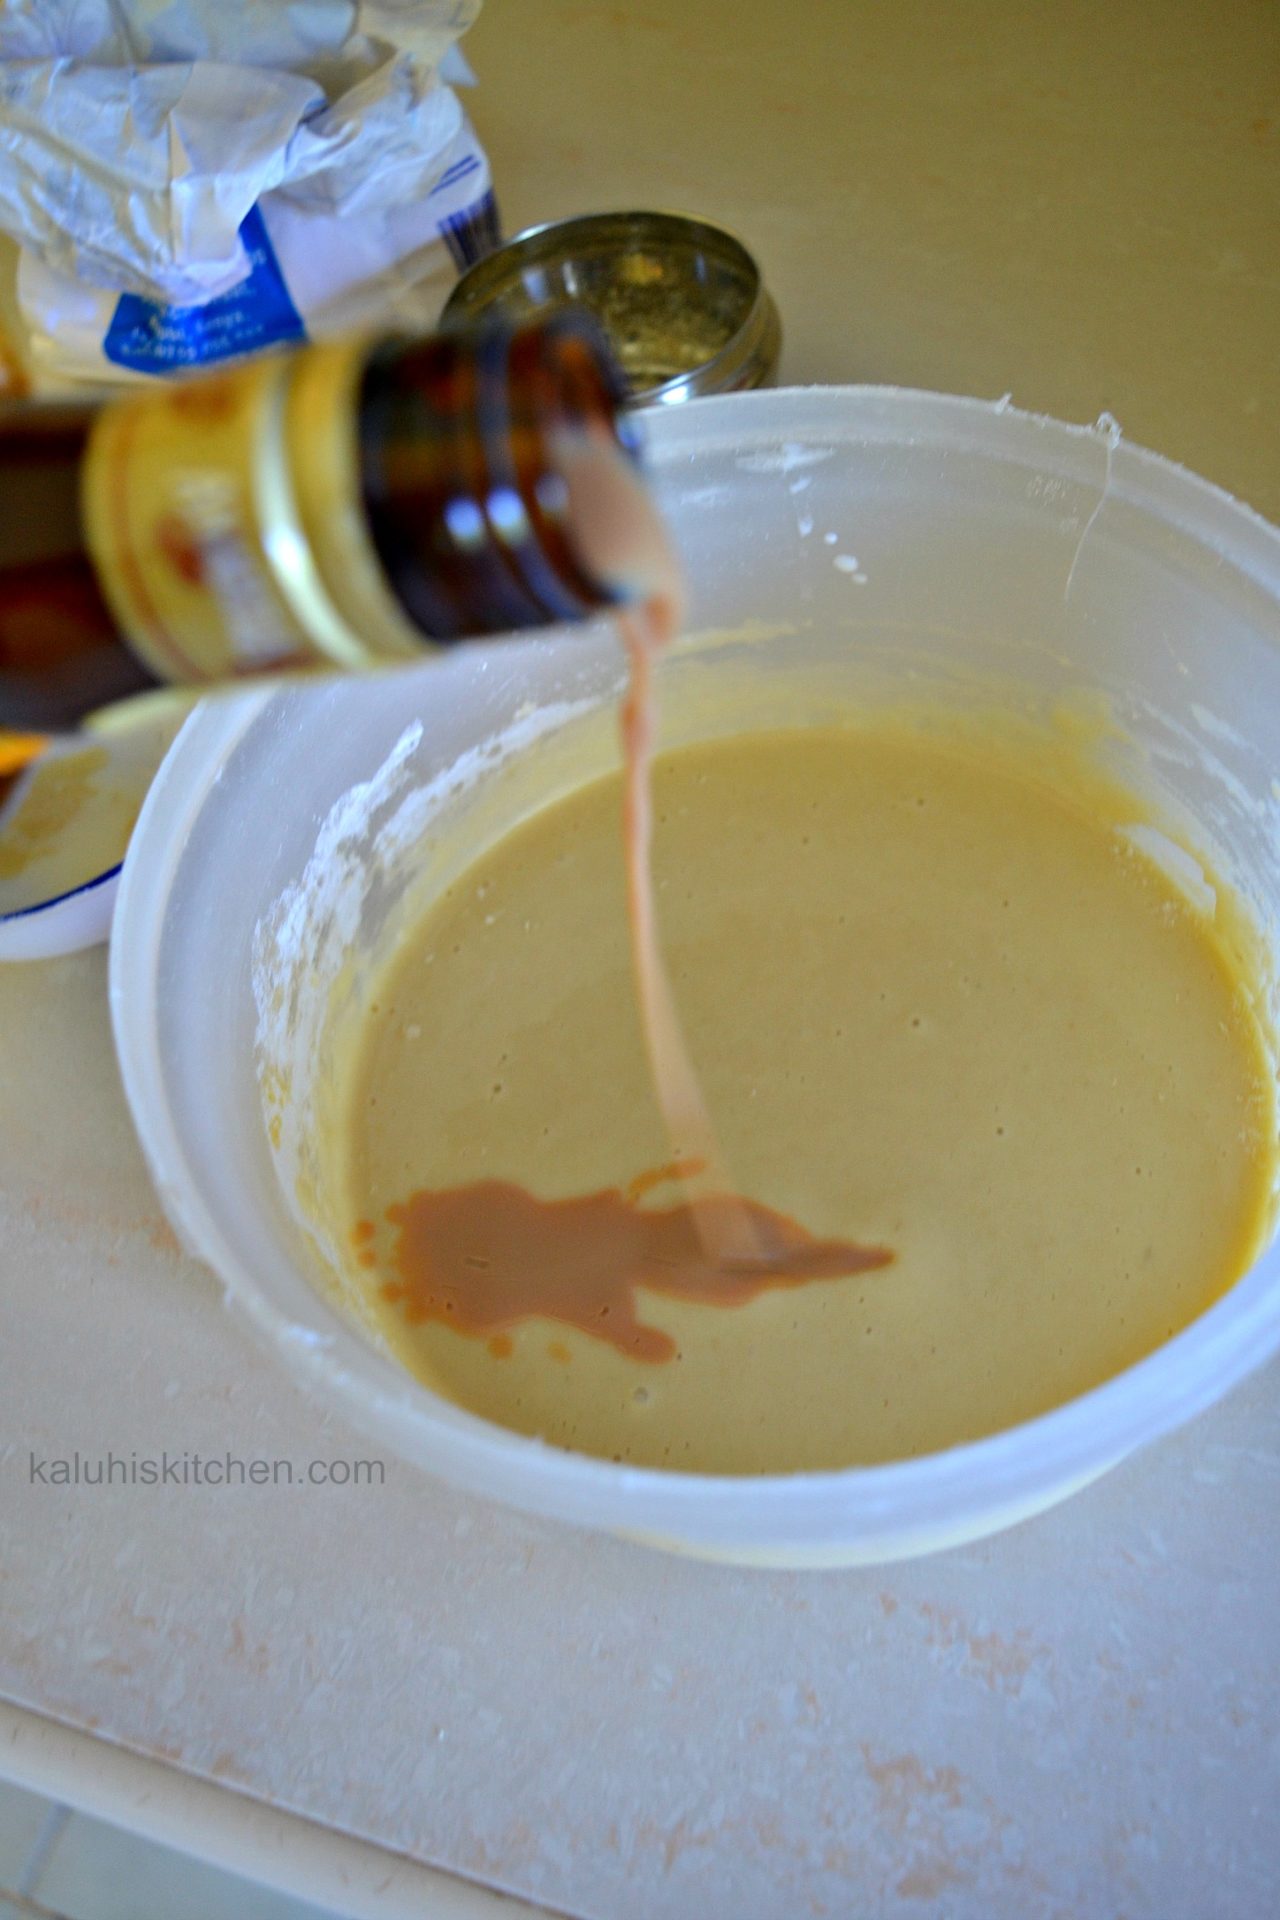 adding amarula to the batter makes the batter rich and extra delicious_you can use any other creme liquer